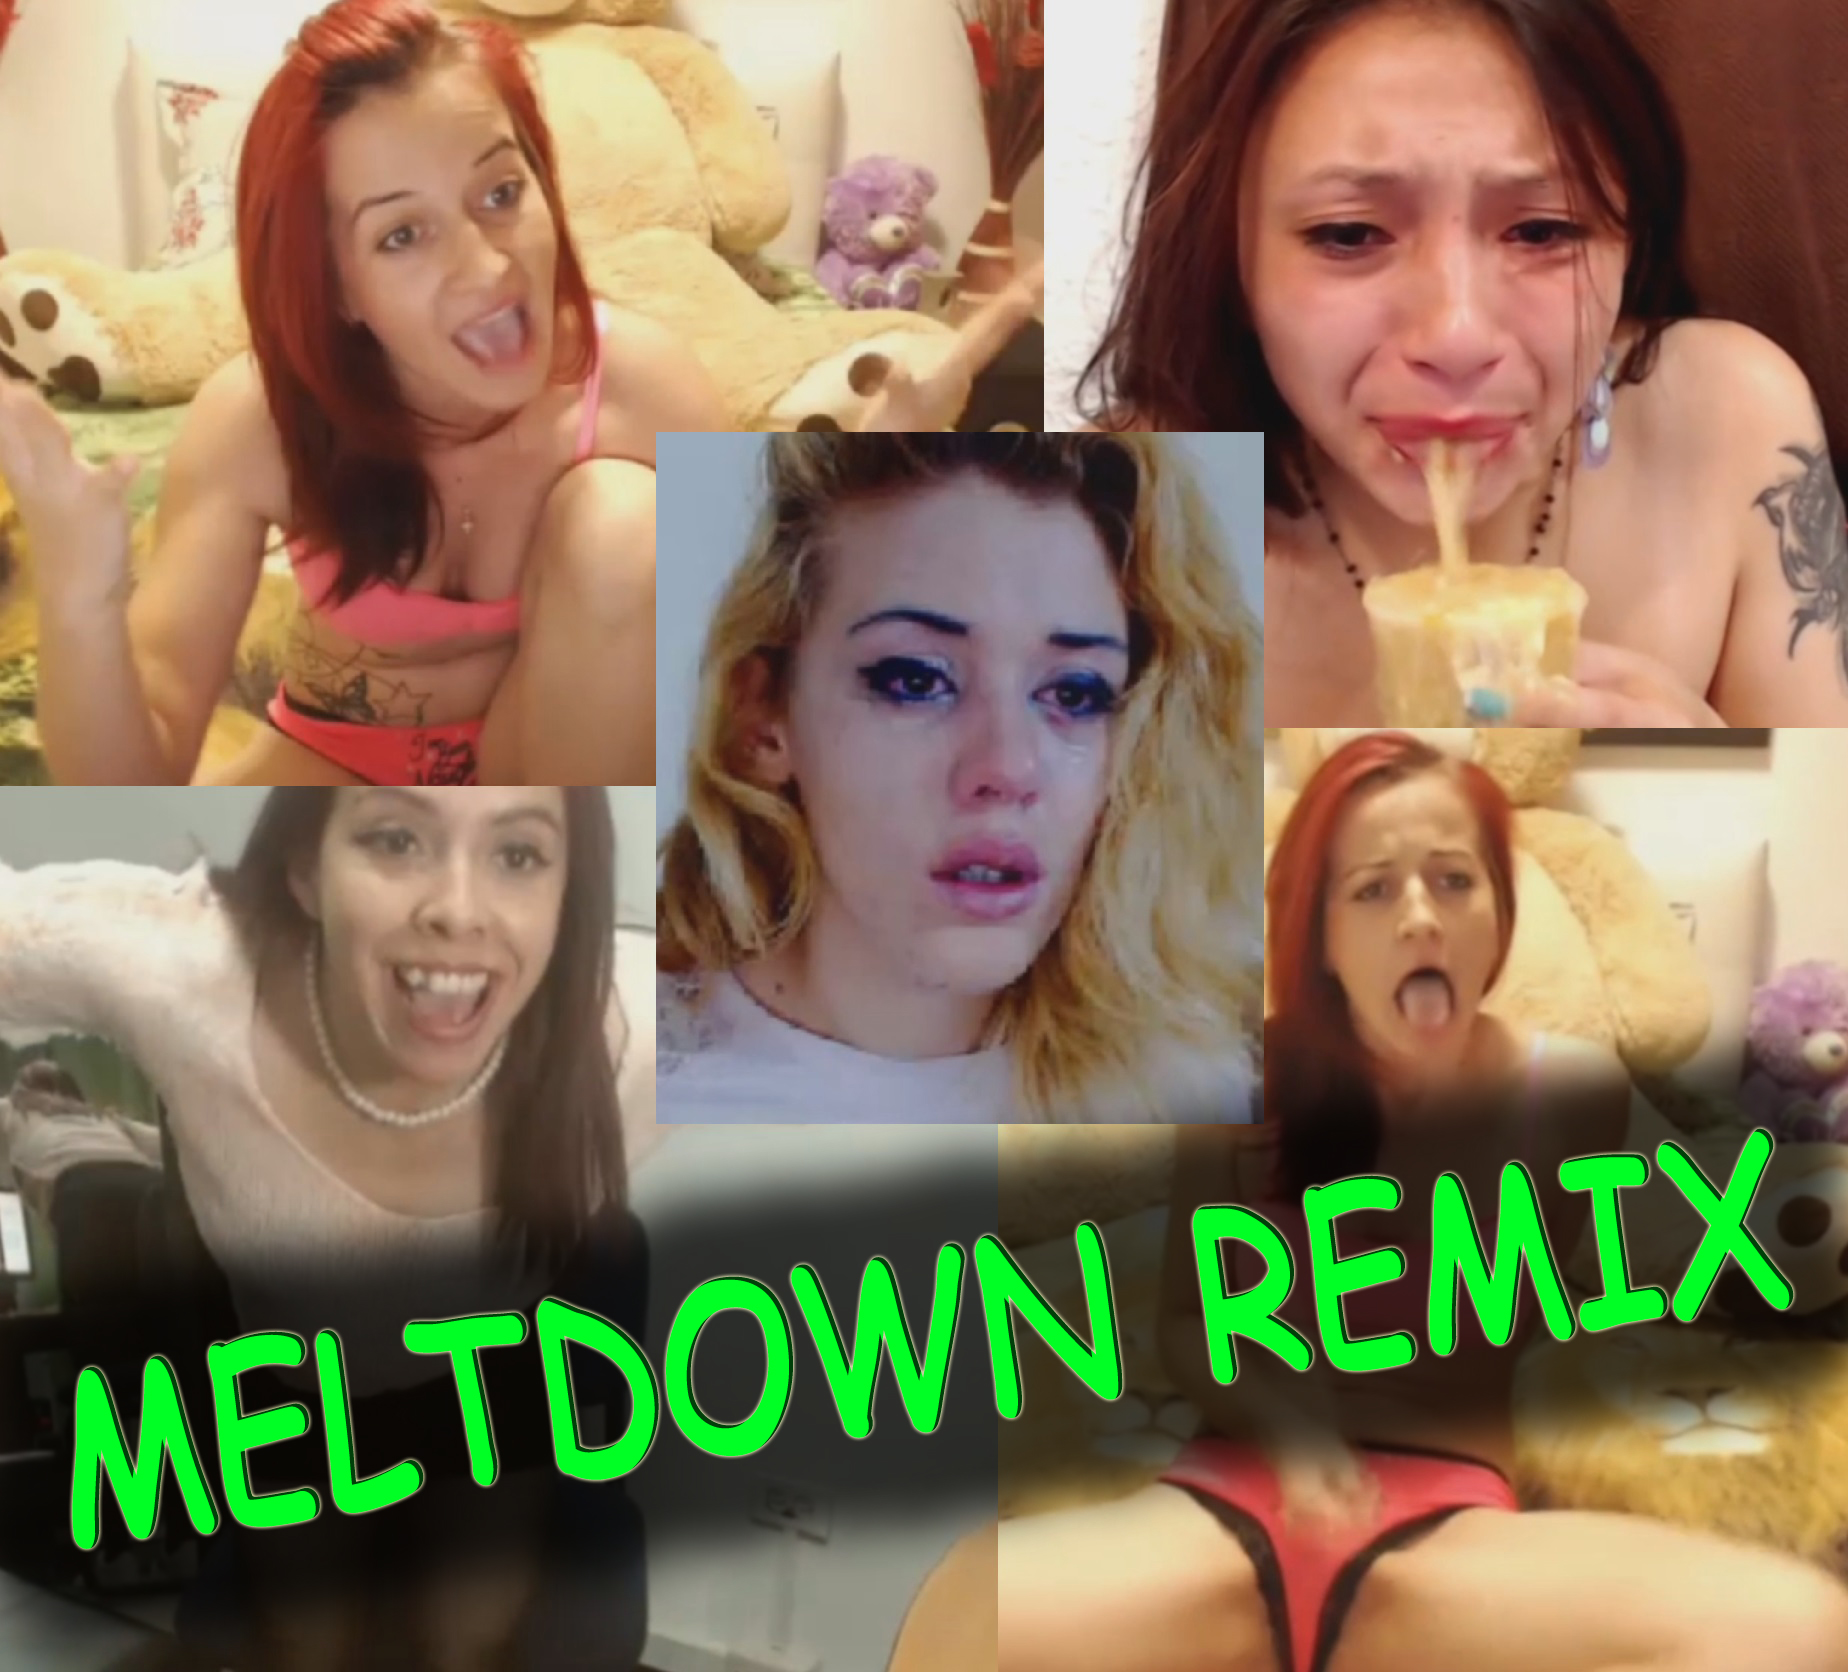 Artsy Pourn Presents - Best of Cam Whore Meltdown and Downfalls 2018